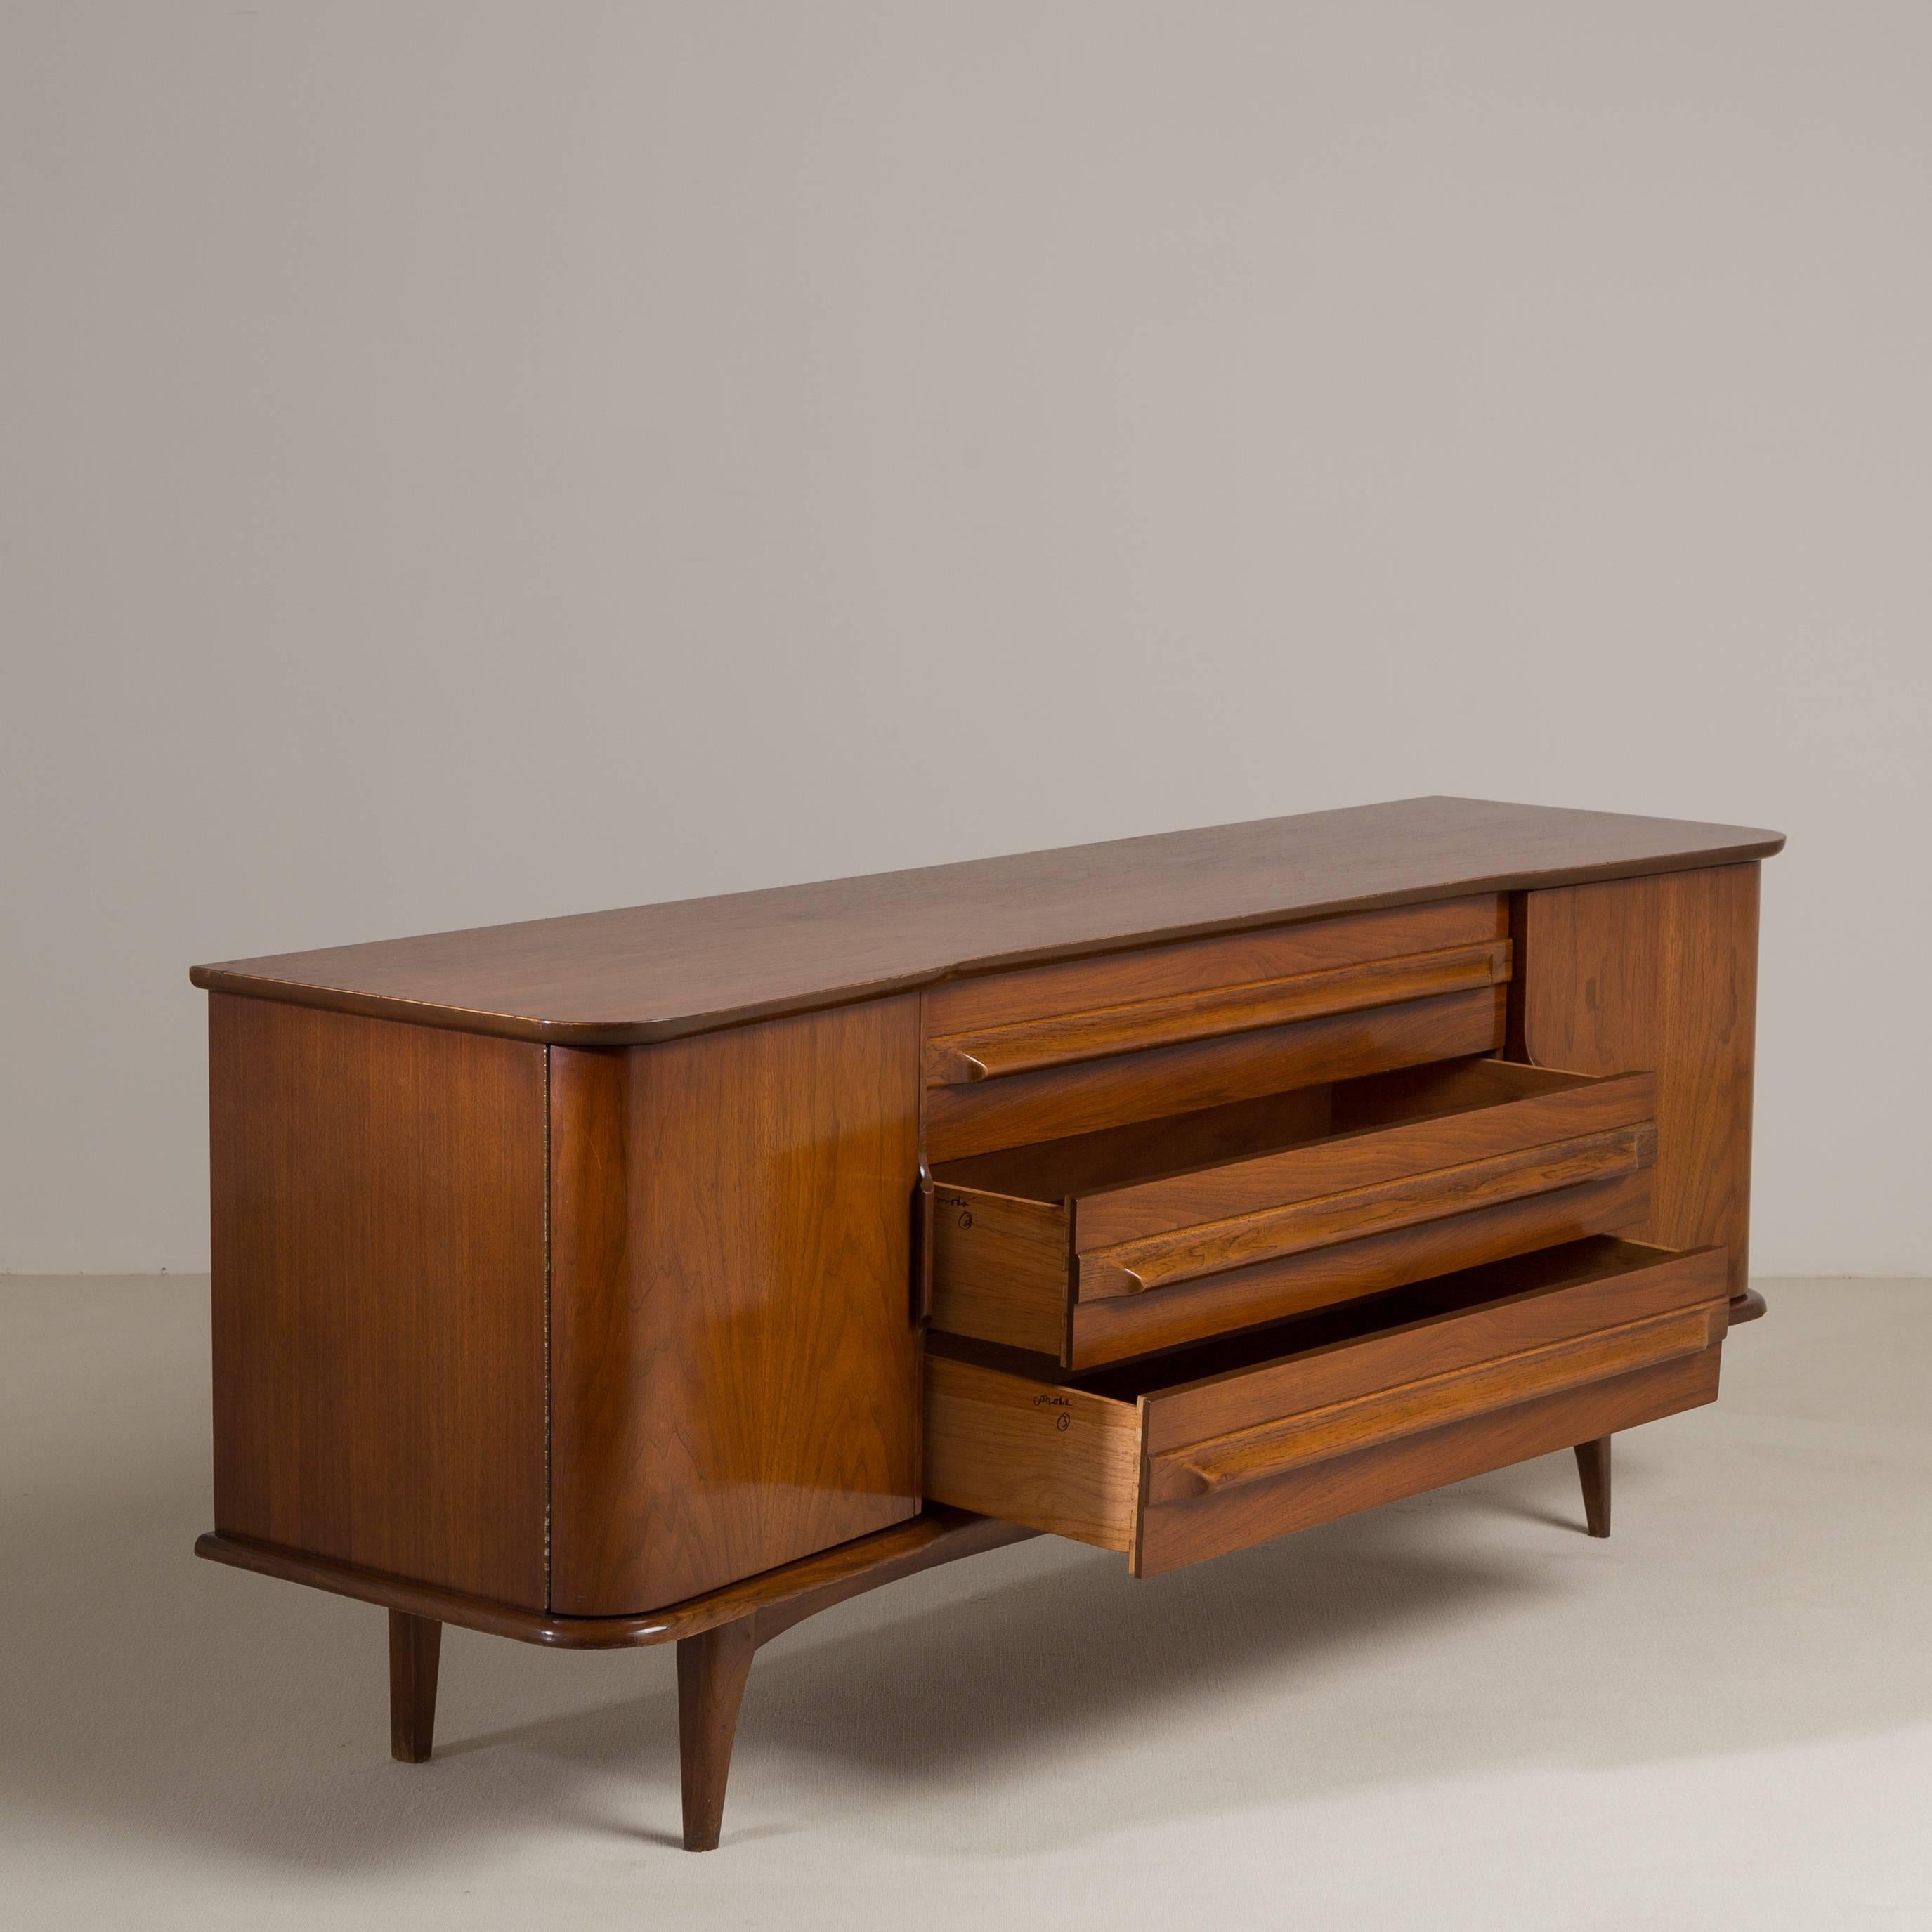 An Elegant American Mid Century Modern Walnut Cabinet featuring Twin Doors concealing Drawers, and Three External Drawers with Carved Wooden Handles circa 1960s